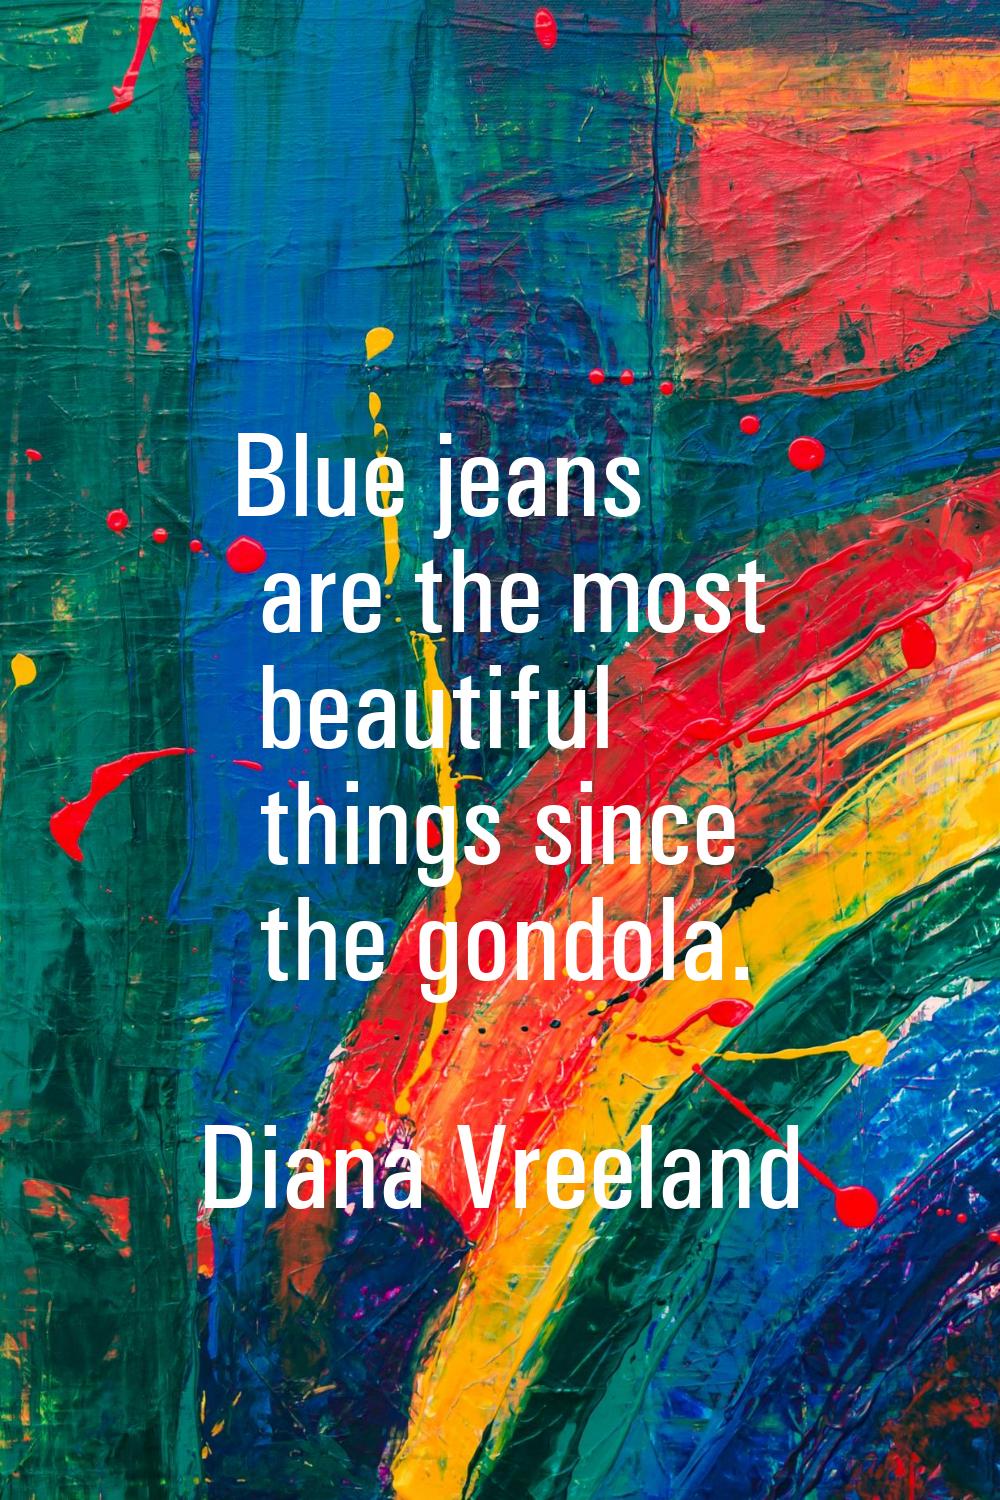 Blue jeans are the most beautiful things since the gondola.